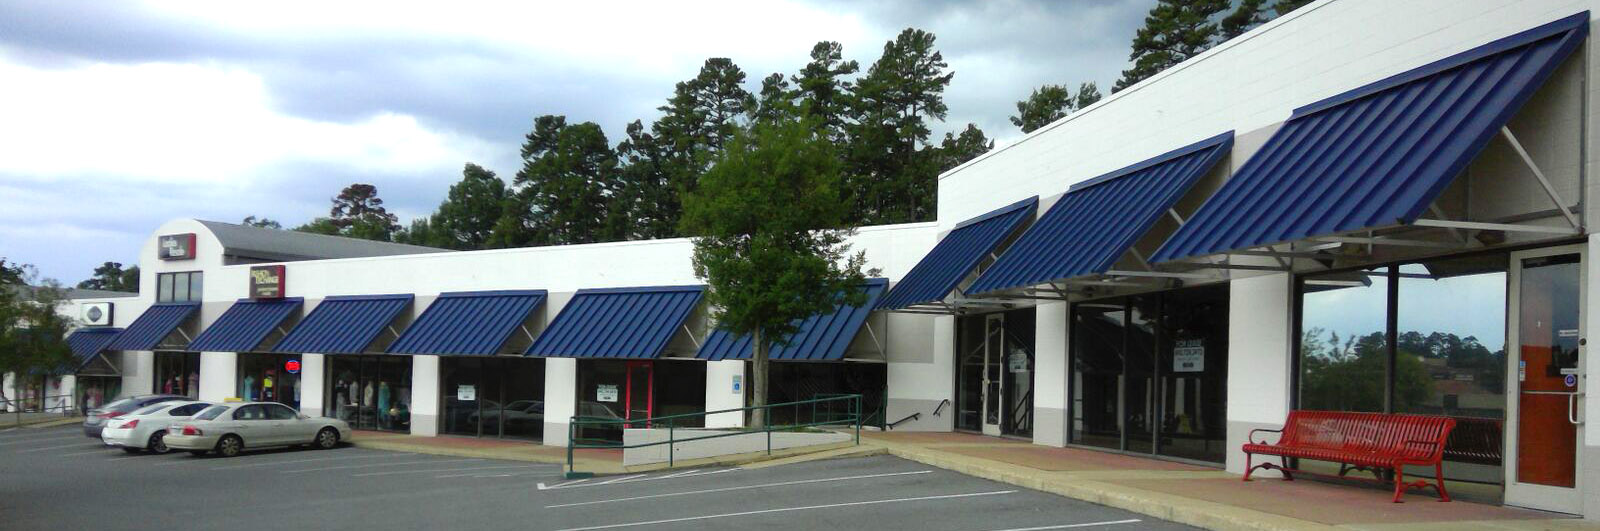 Commercial Retail painting - CertaPro Painters in Little Rock, AR